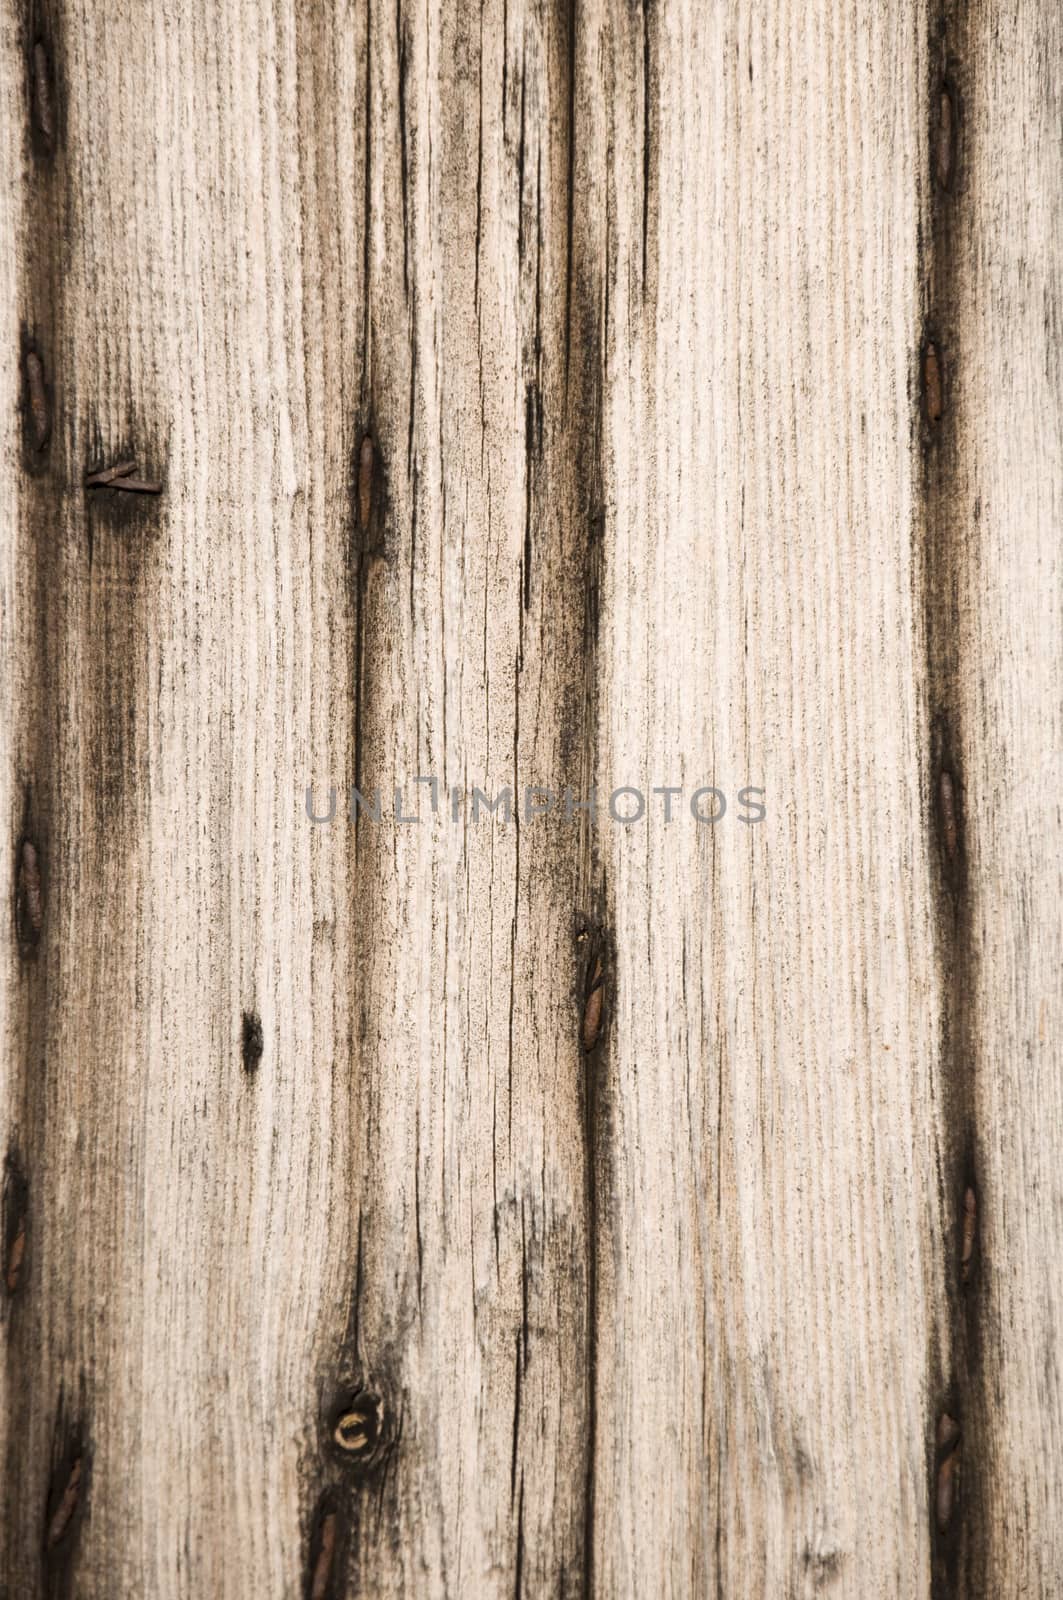  Wood texture with natural patterns  by jelen80